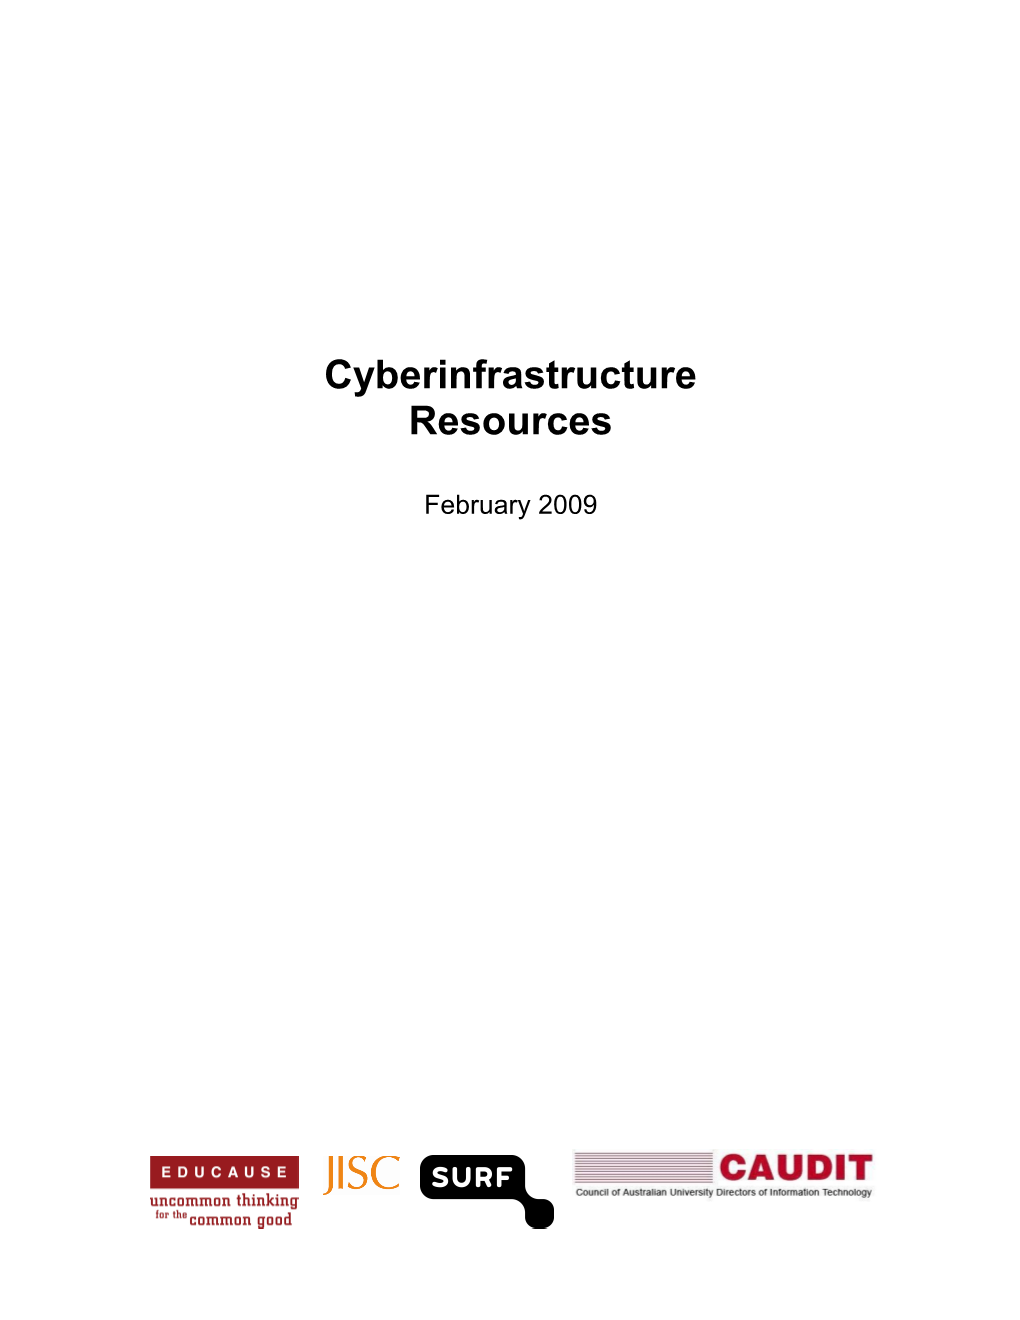 7 Things You Should Know About Cyberinfrastructure